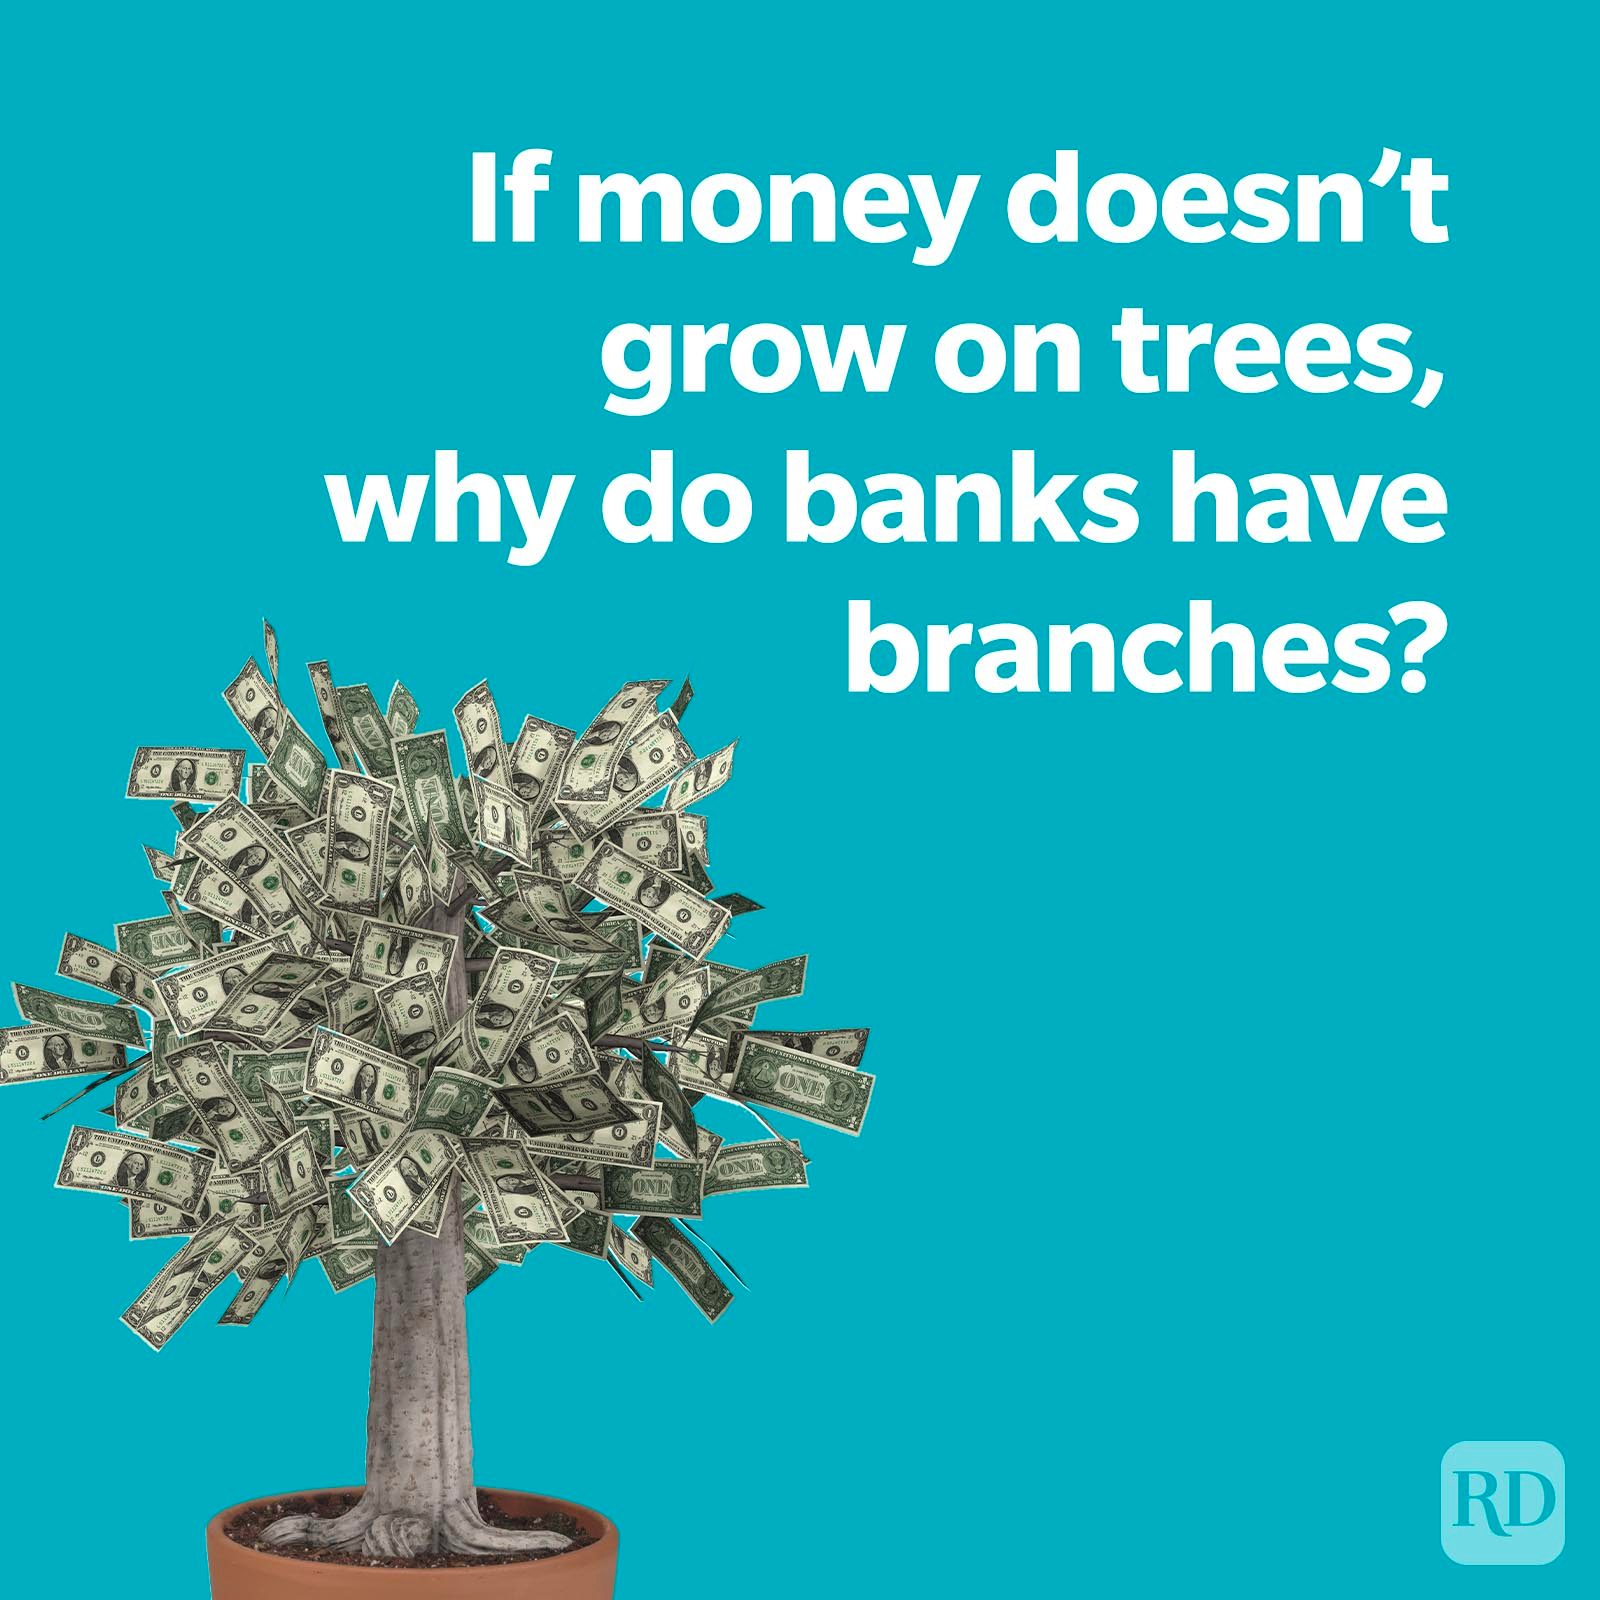 If money doesn't grow on trees, why do banks have branches then?